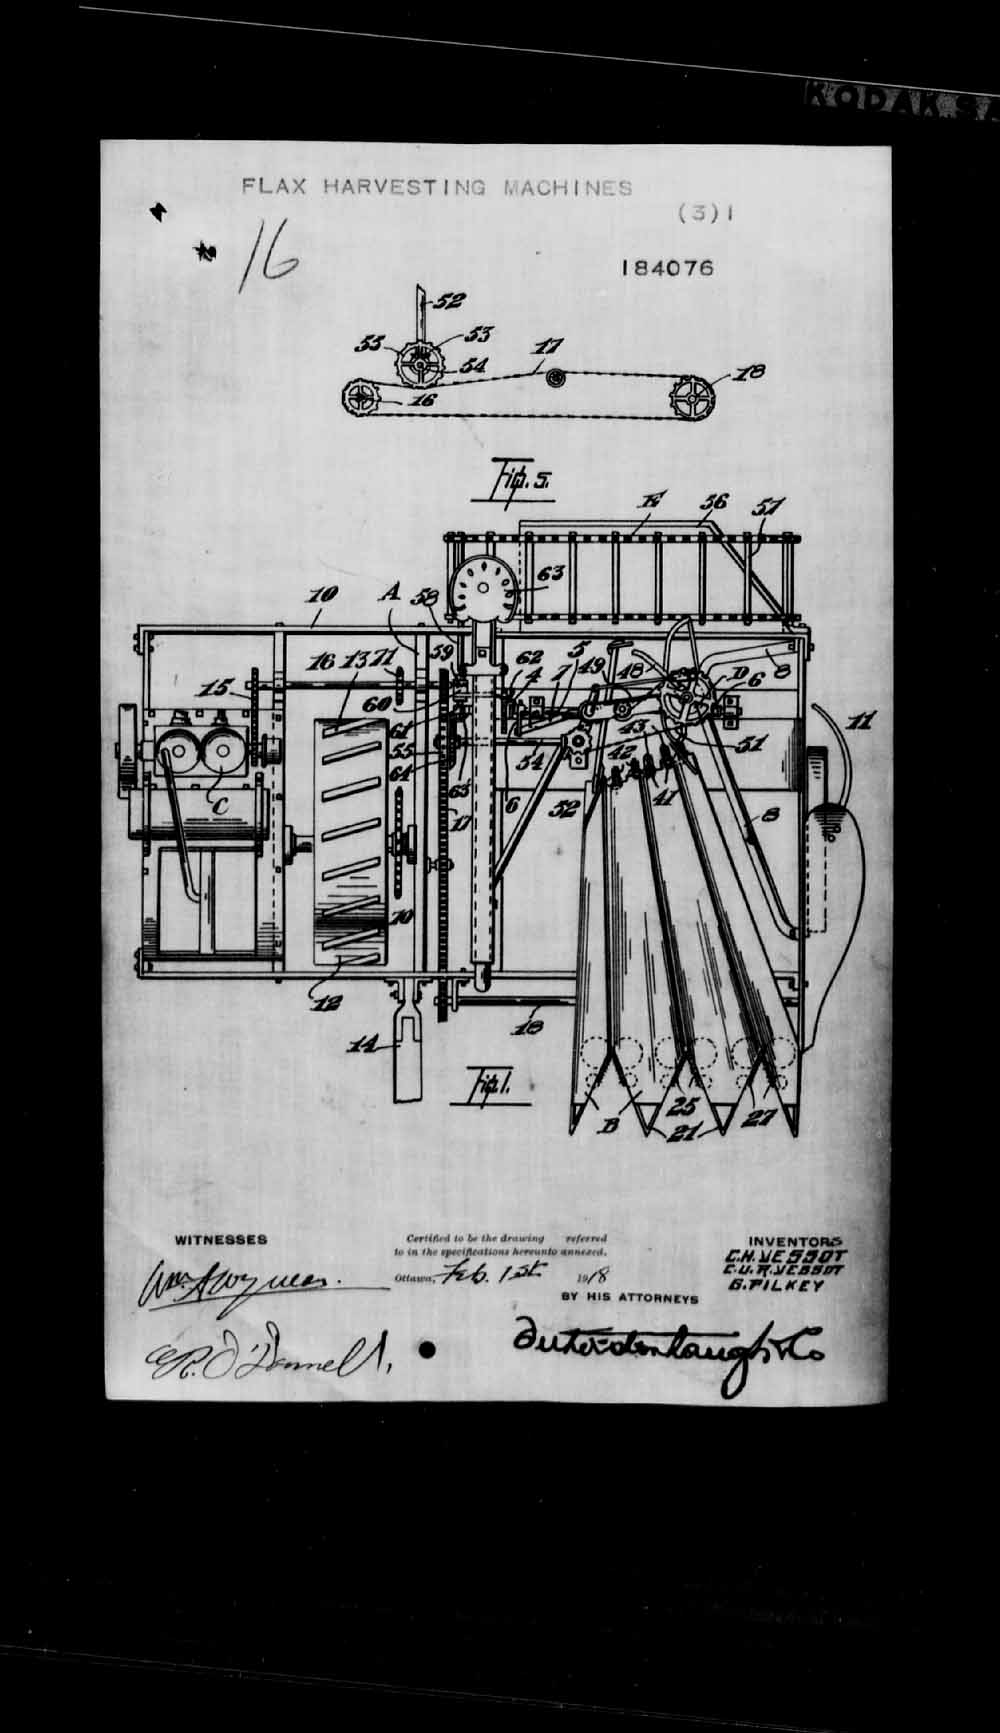 Digitized page of Canadian Patents, 1869-1919 for Image No.: e006652064